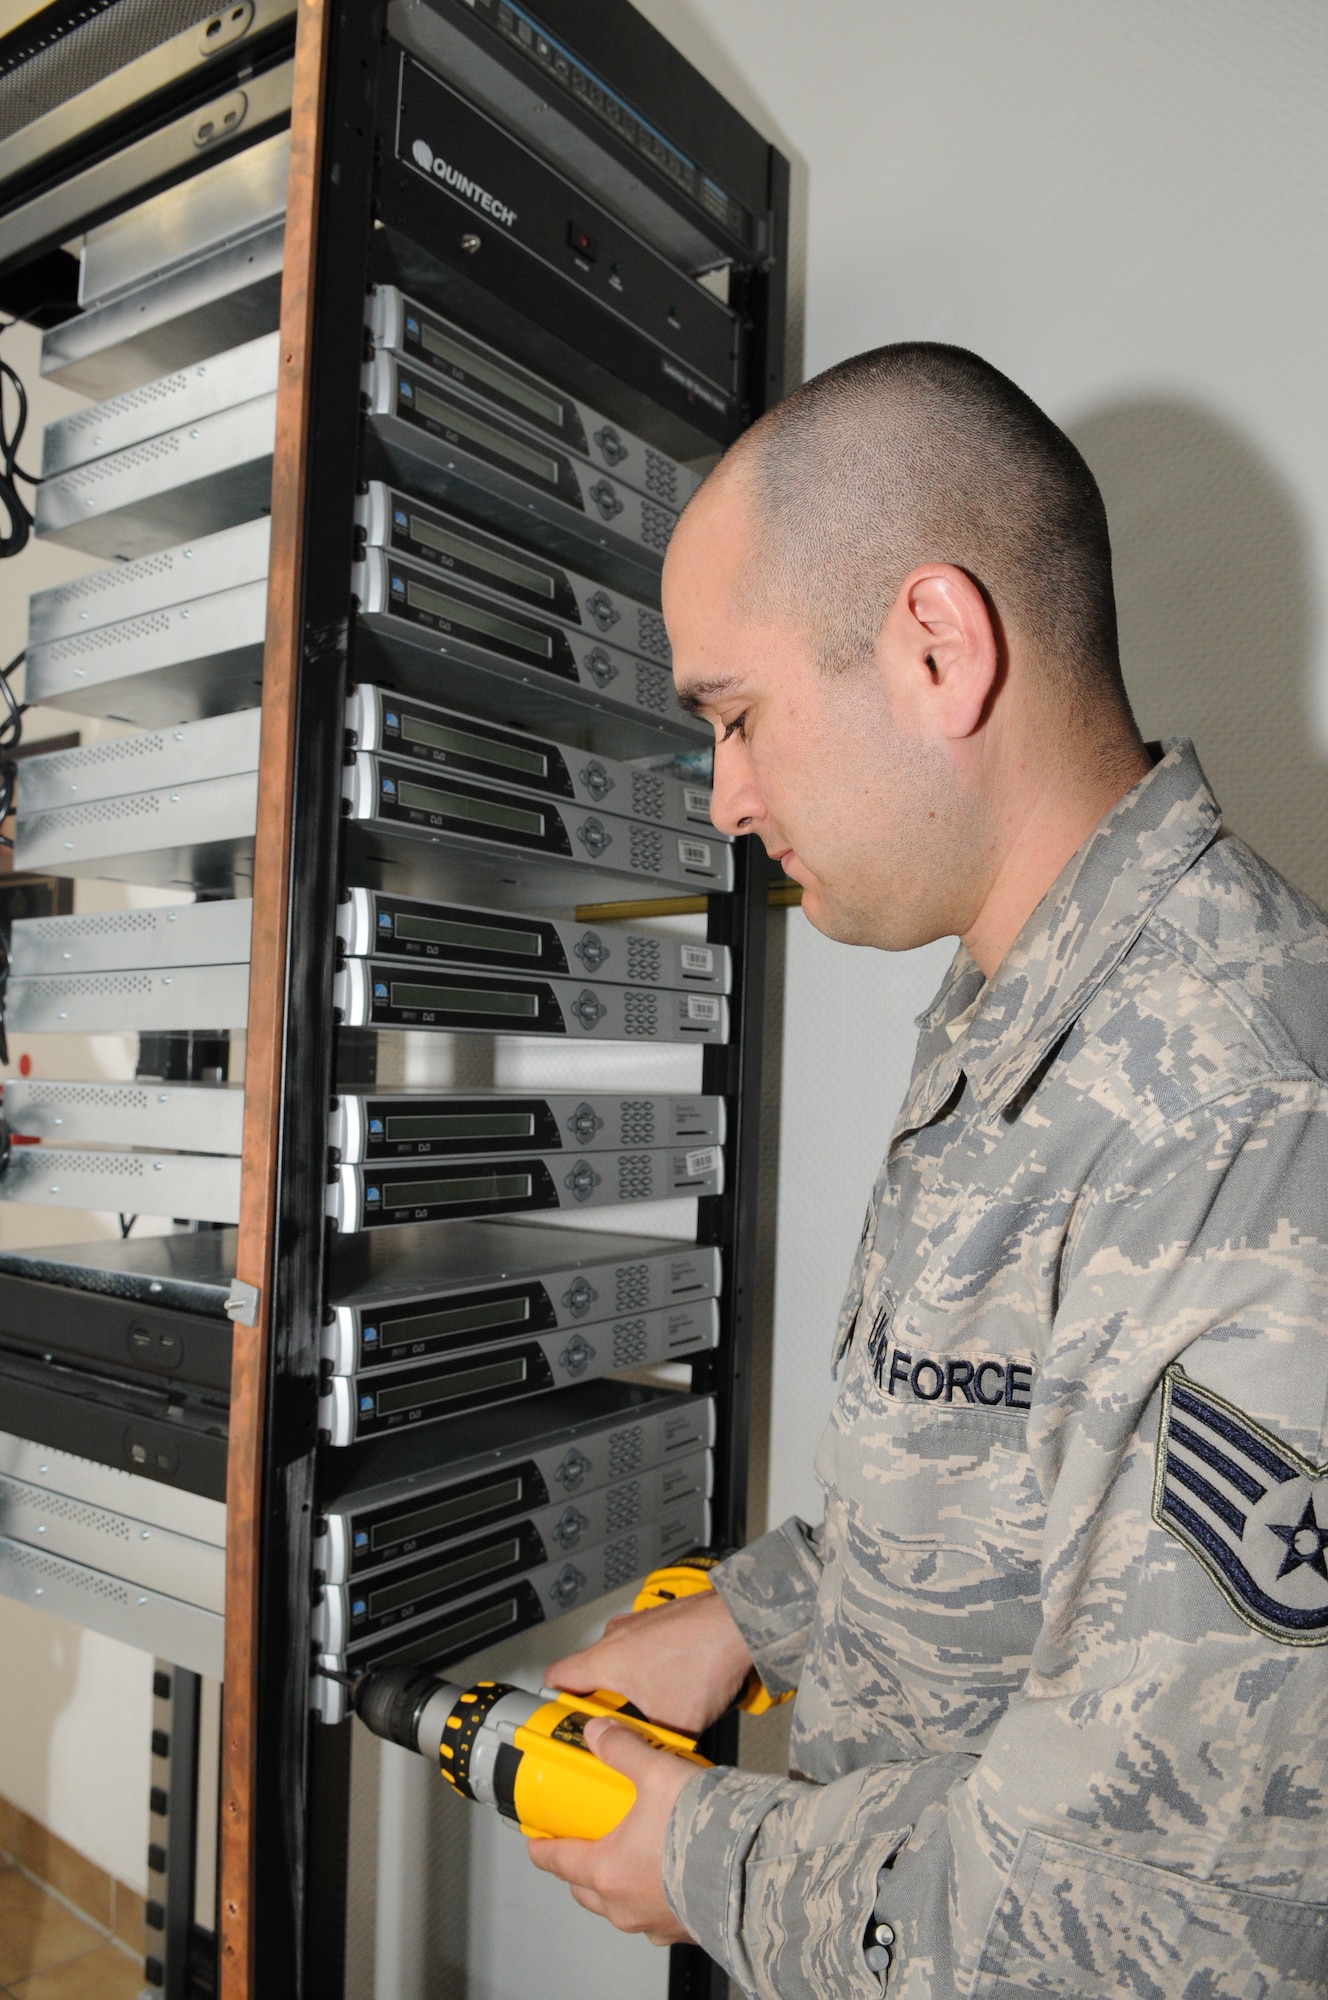 SPANGDAHLEM AIR BASE, Germany – Staff Sgt. Modesto Alcala, Armed Forces Network Spangdahlem broadcast maintenance supervisor, installs new satellite decoders on a decoder rack April 20 at Bitburg Annex. The new decoders were given to AFN by the Defense Media Activity and will soon replace older equipment when AFN Spangdahlem moves into its new renovated building on Spangdahlem. (U.S. Air Force photo/Senior Airman Nick Wilson)